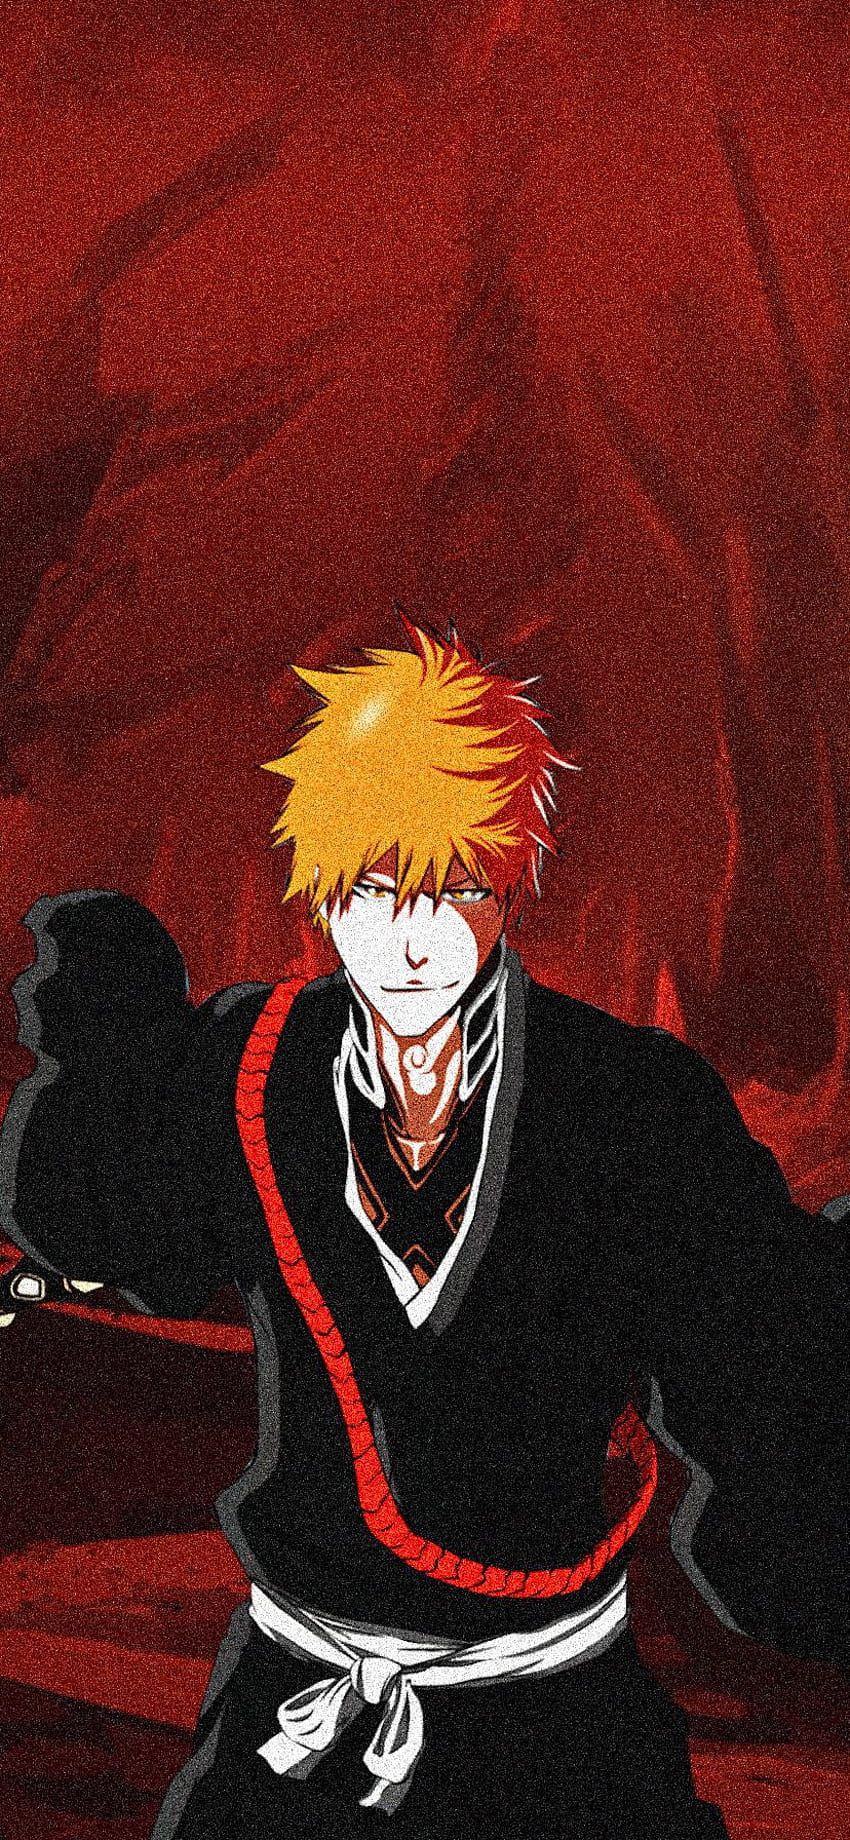 ichigo i made for iphone 11/ iphone xr, PM me if you want me to make one for you for any other type of phone : bleach, 11 Red Anime HD phone wallpaper